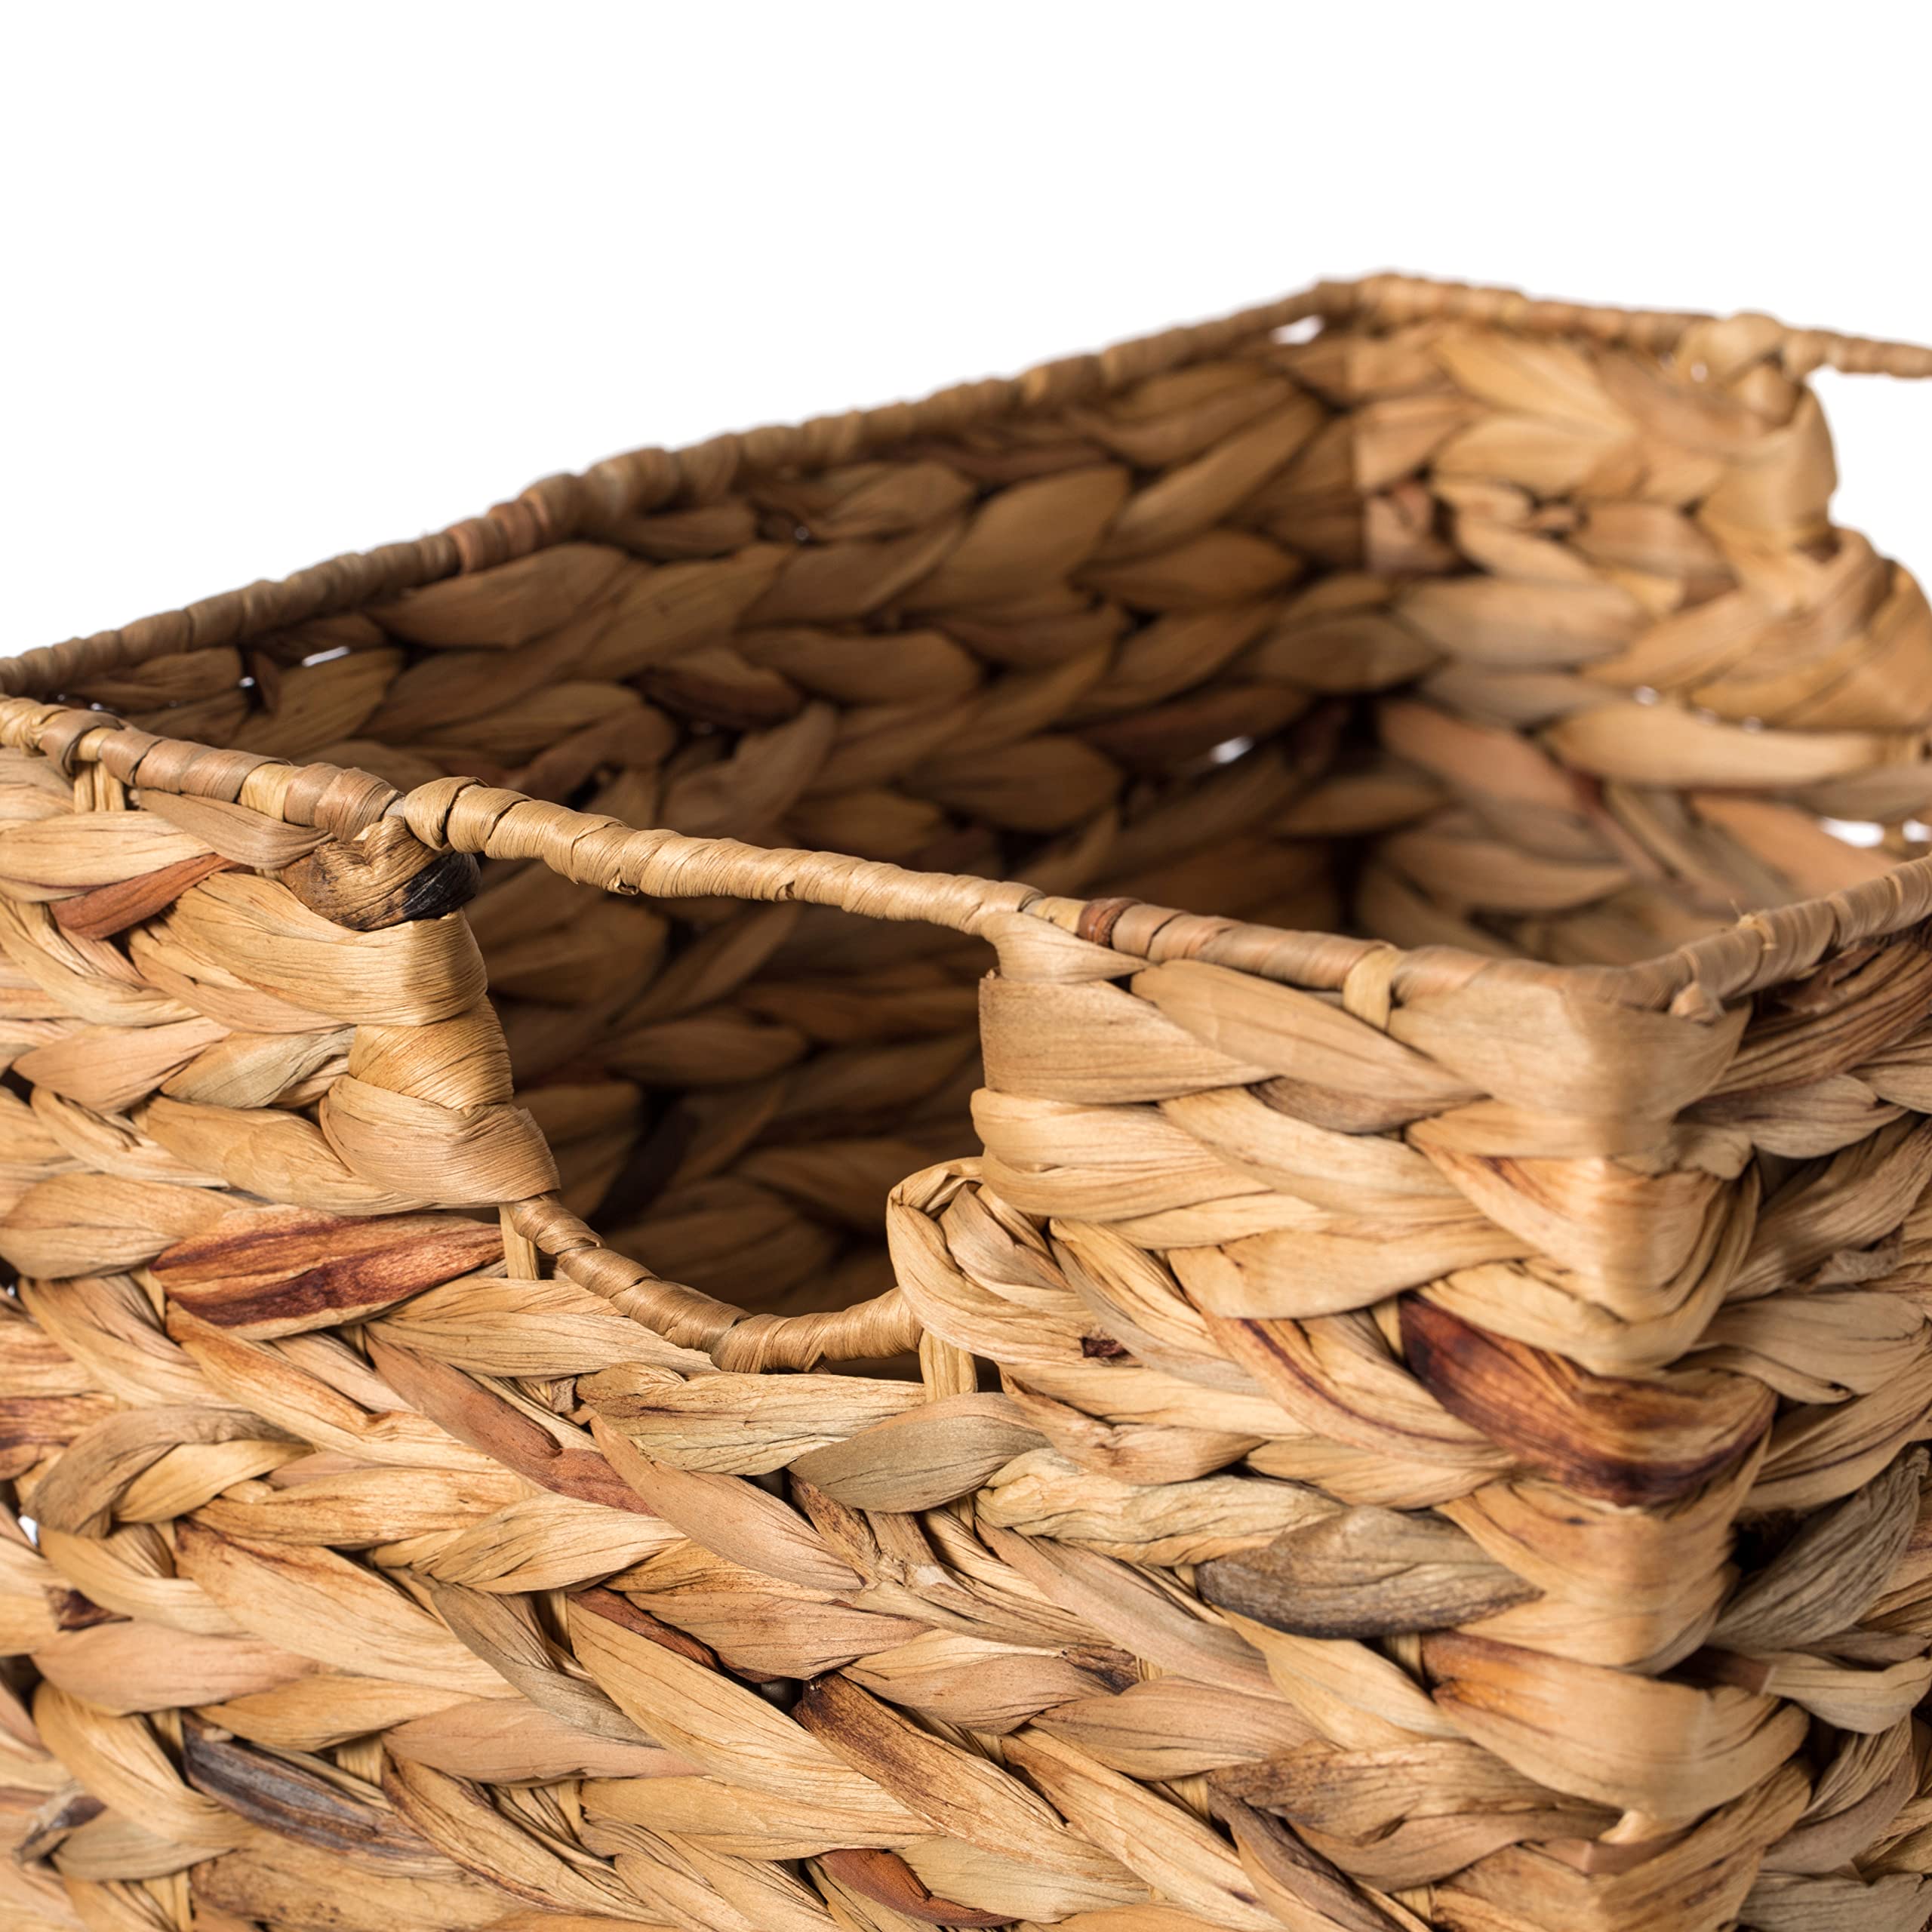 Natural Decorative Woven Water Hyacinth Storage Basket for The Playroom, Bedroom, and Living Room